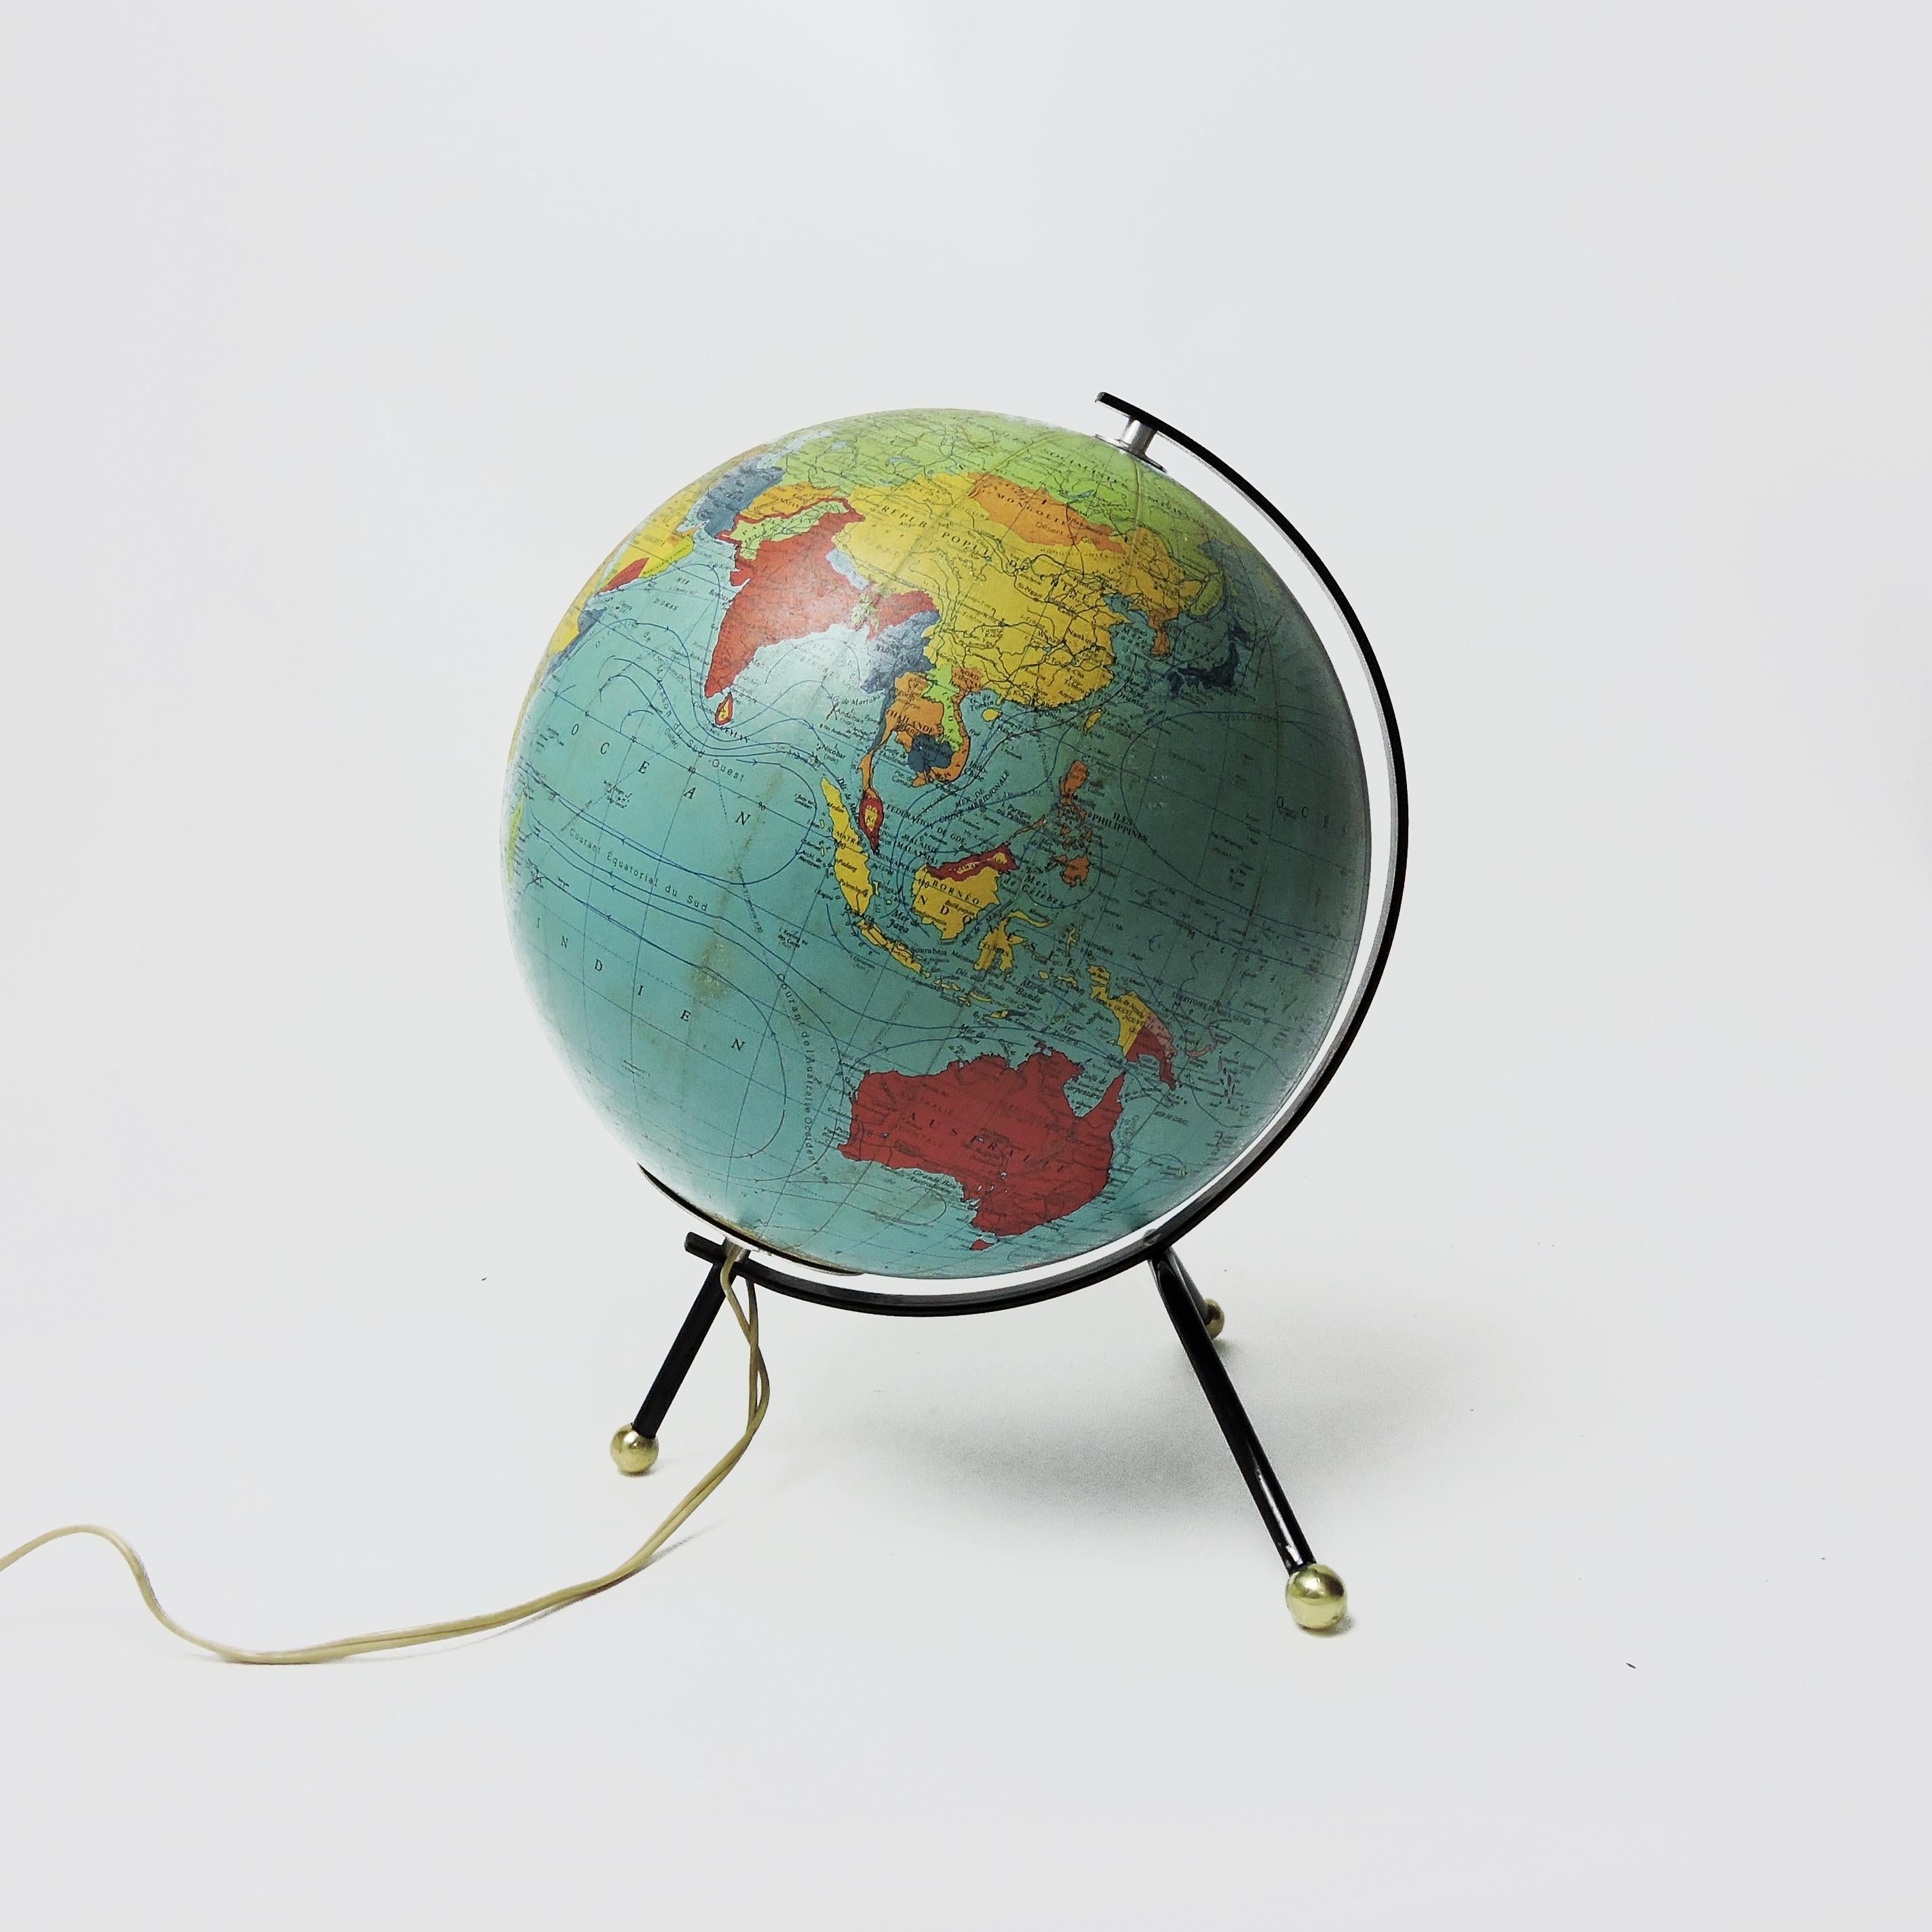 Vintage Tripod Glowing Earth Globe by Cartes Taride, 1966 For Sale 1